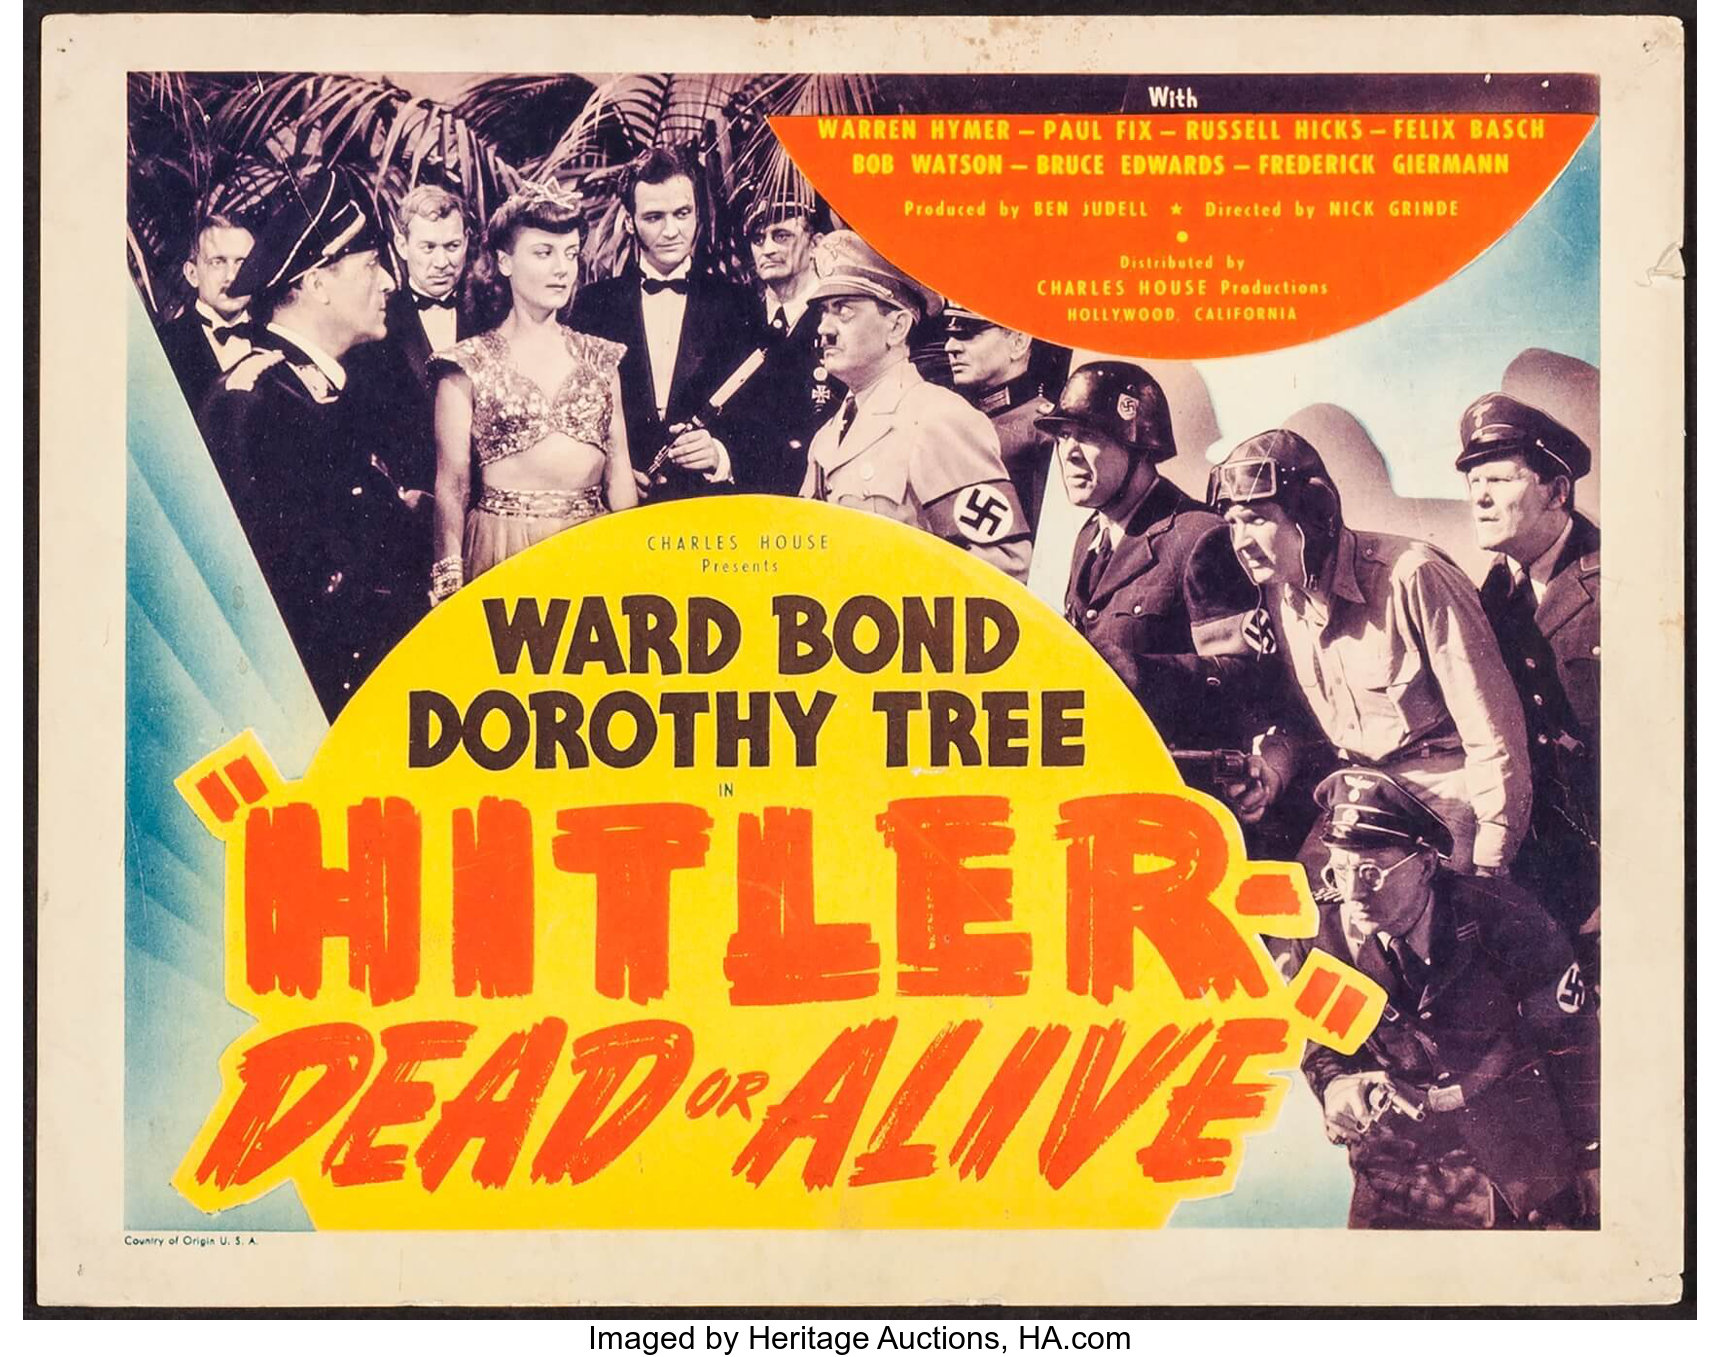 Hitler - Dead or Alive (1944). Think Inglourious Basterds, but with the Three Stooges.